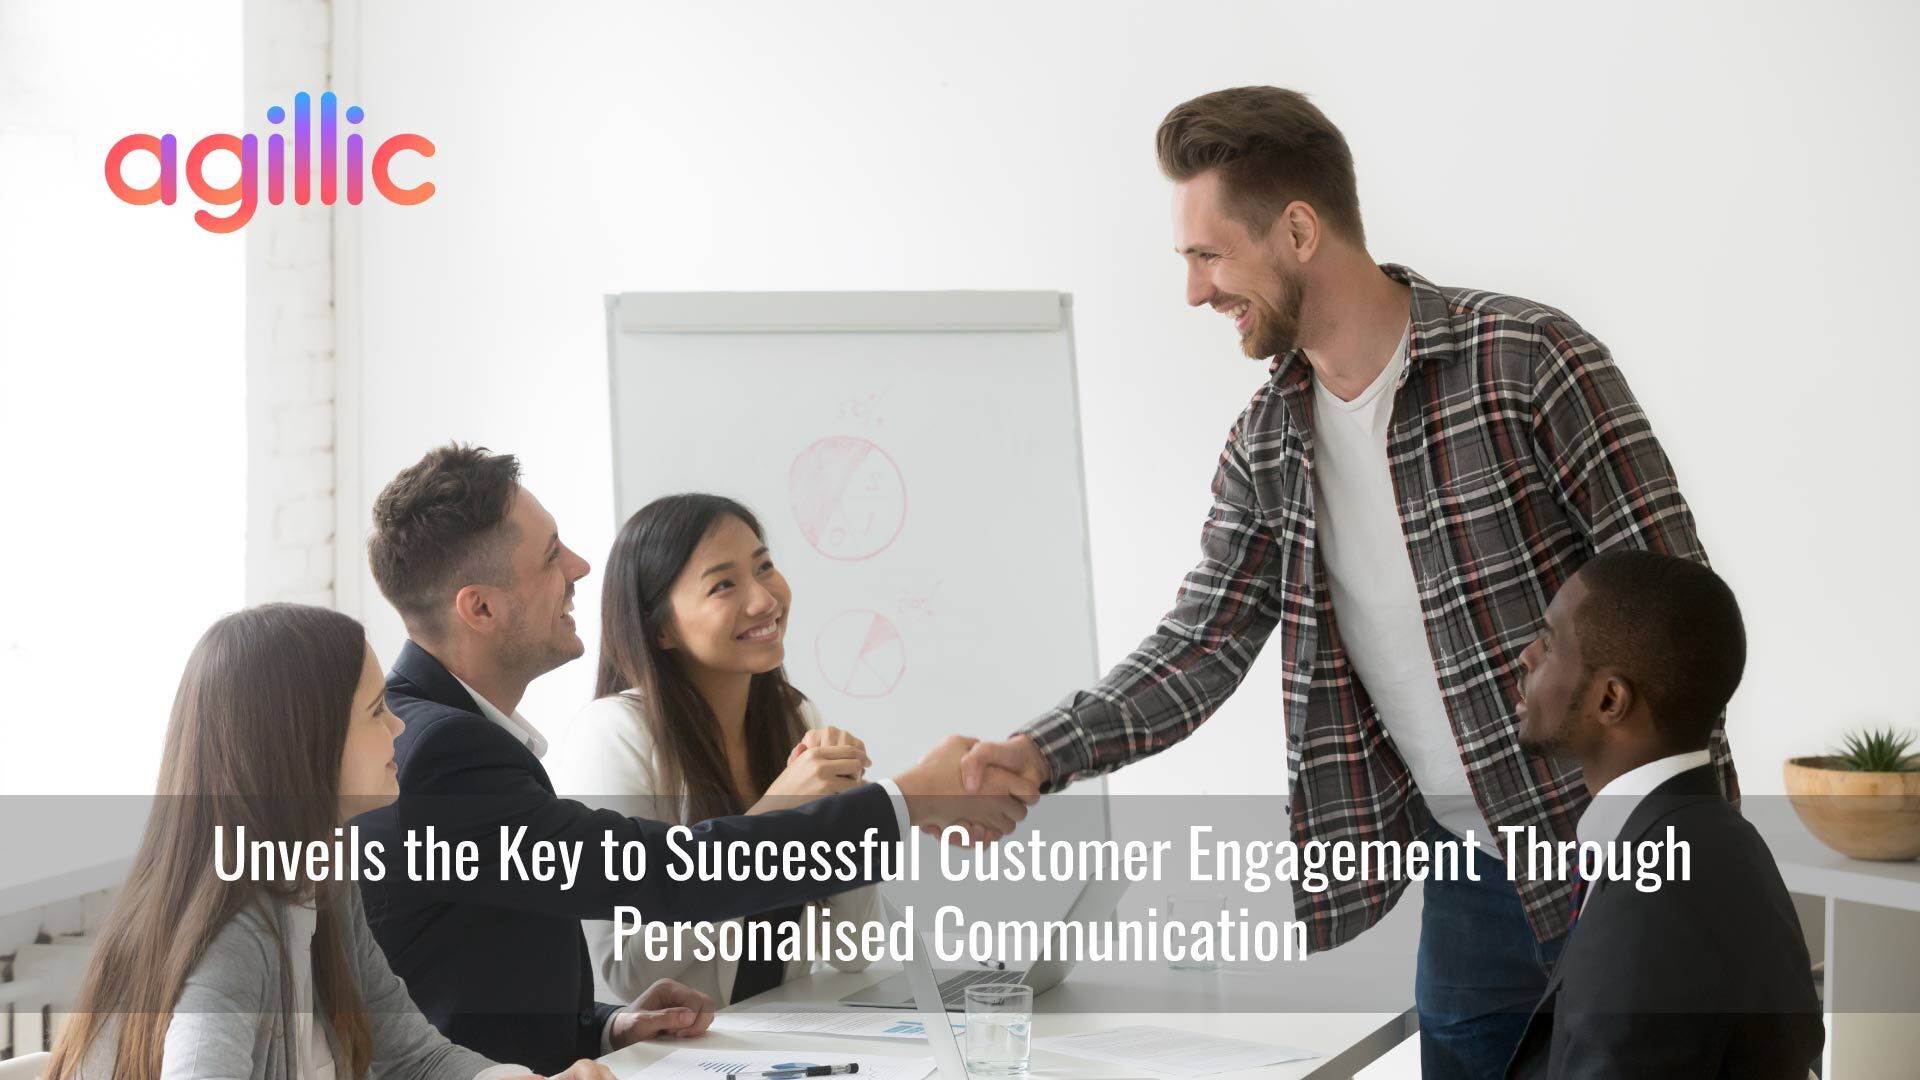 Agillic unveils the key to successful customer engagement through personalised communication in Børsen